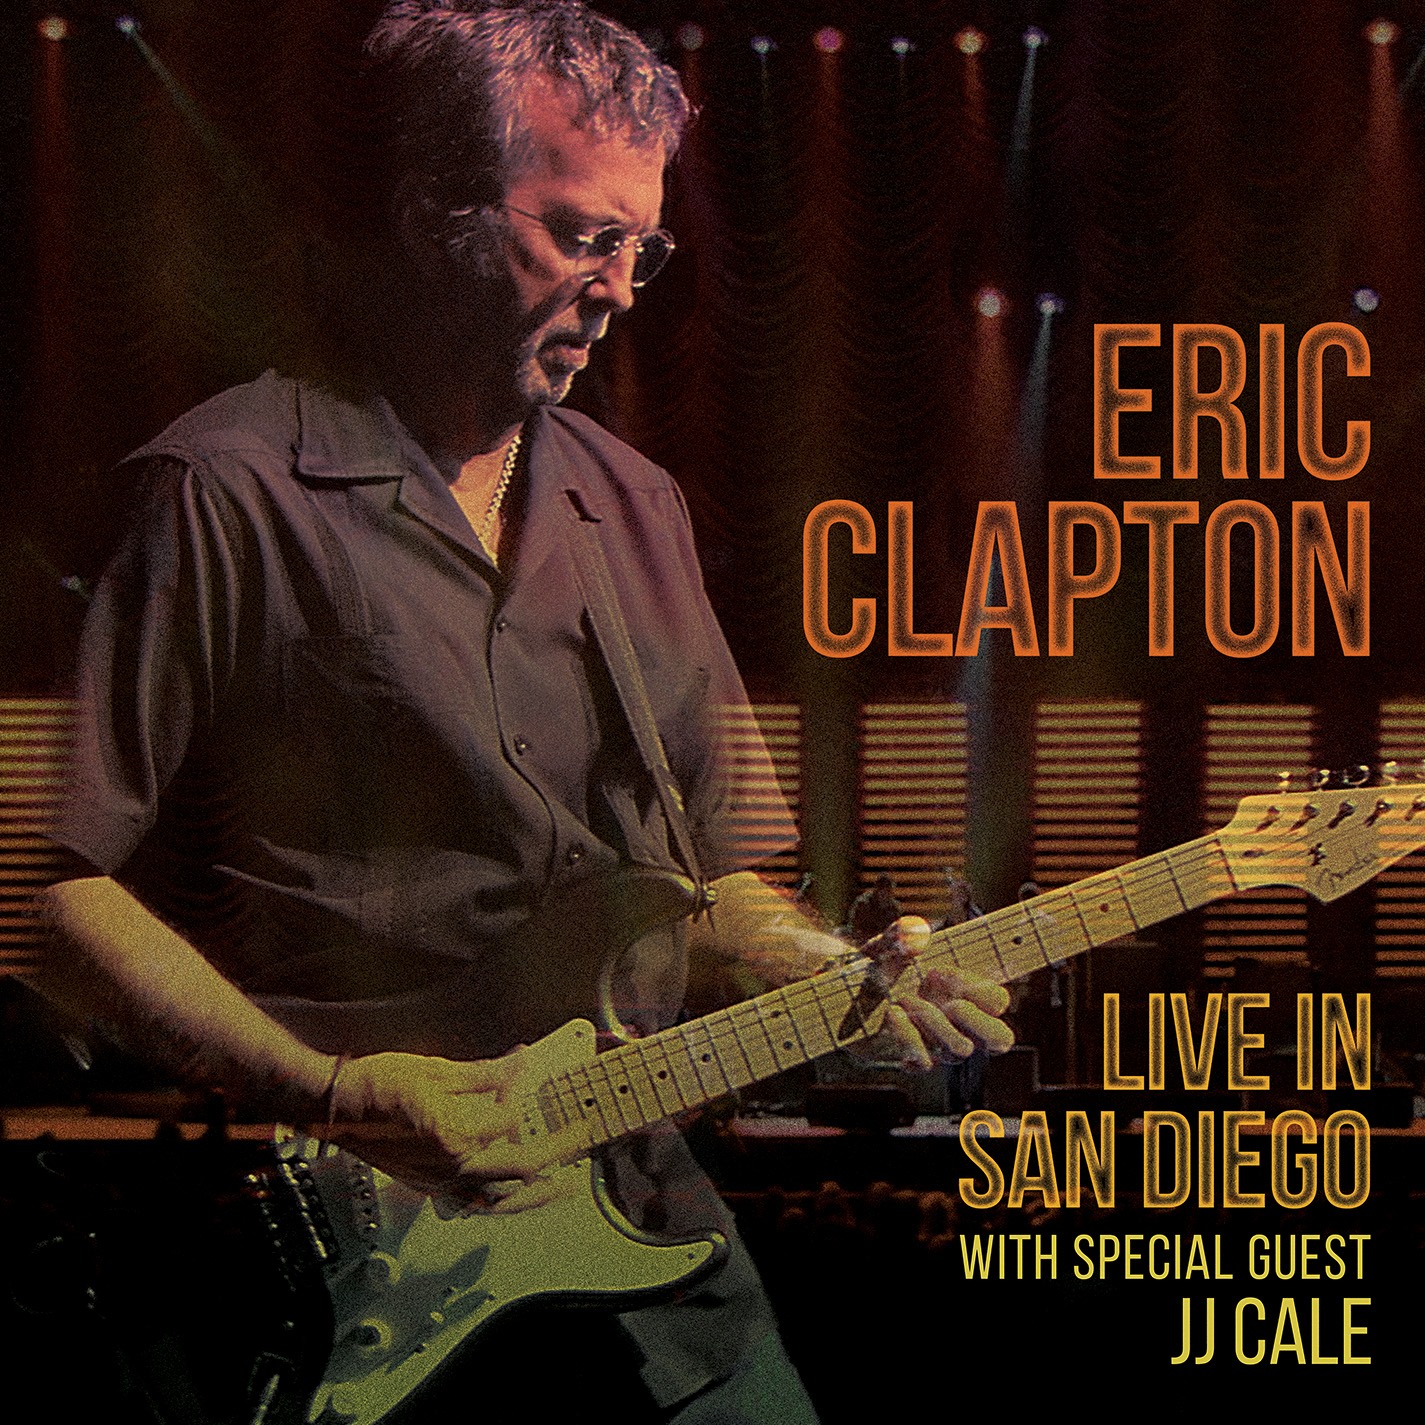 Eric Clapton Live in San Diego with special guest JJ Cale cover